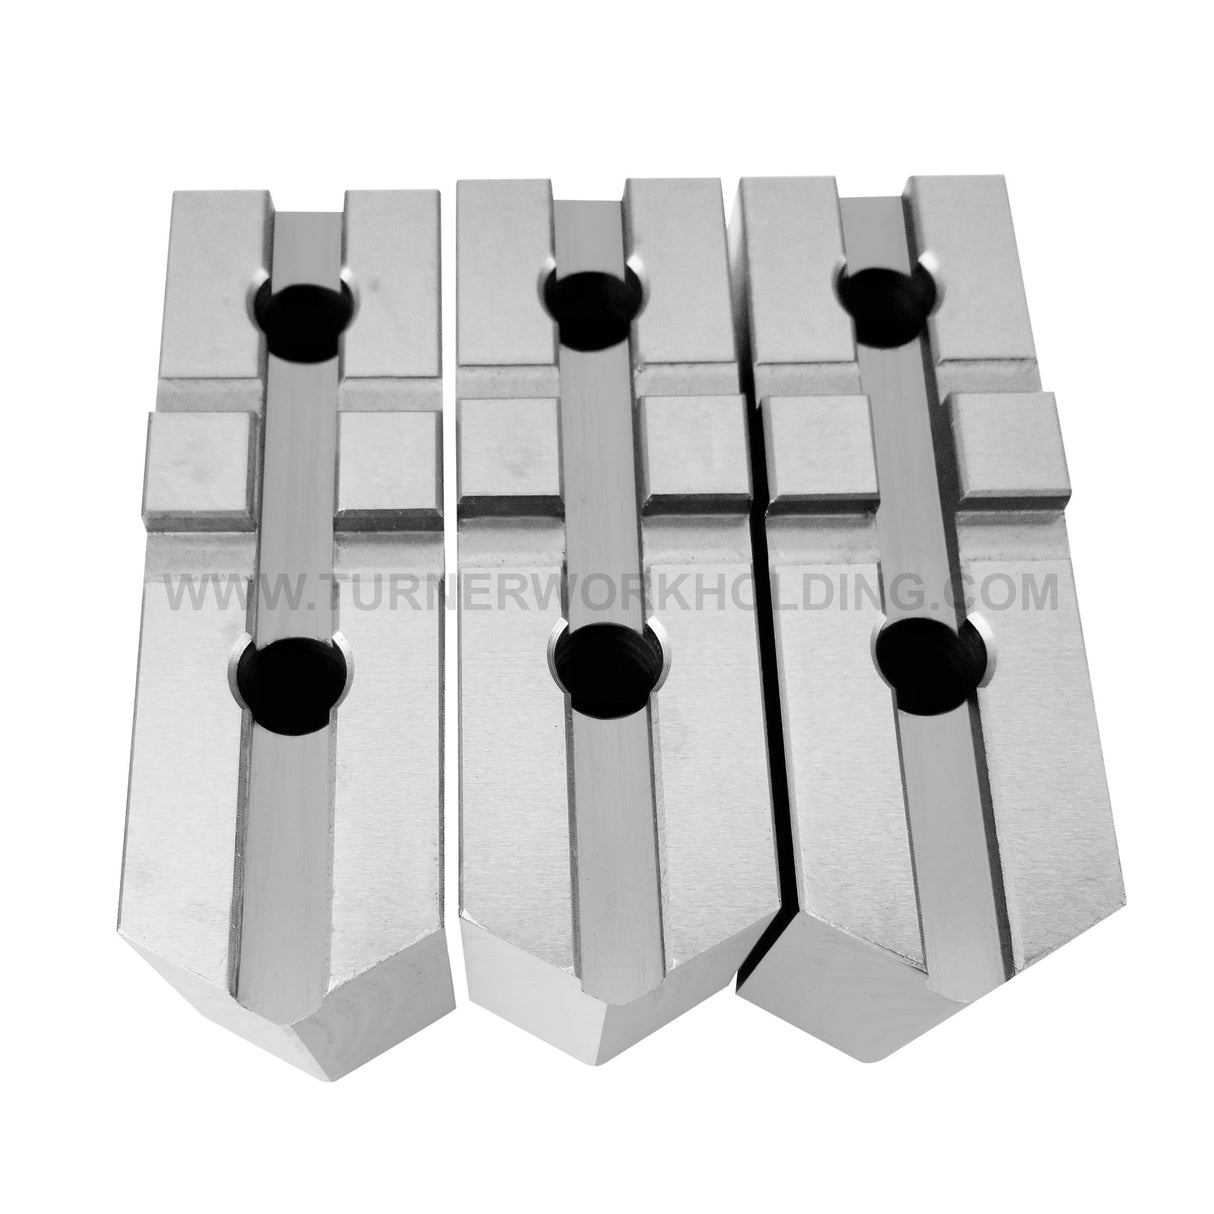 TG-10C-3.0-AP- AMERICAN STANDARD ALUMINUM SOFT JAWS FOR TONGUE & GROOVE 10" CHUCK 3.0" HT (3 PC)